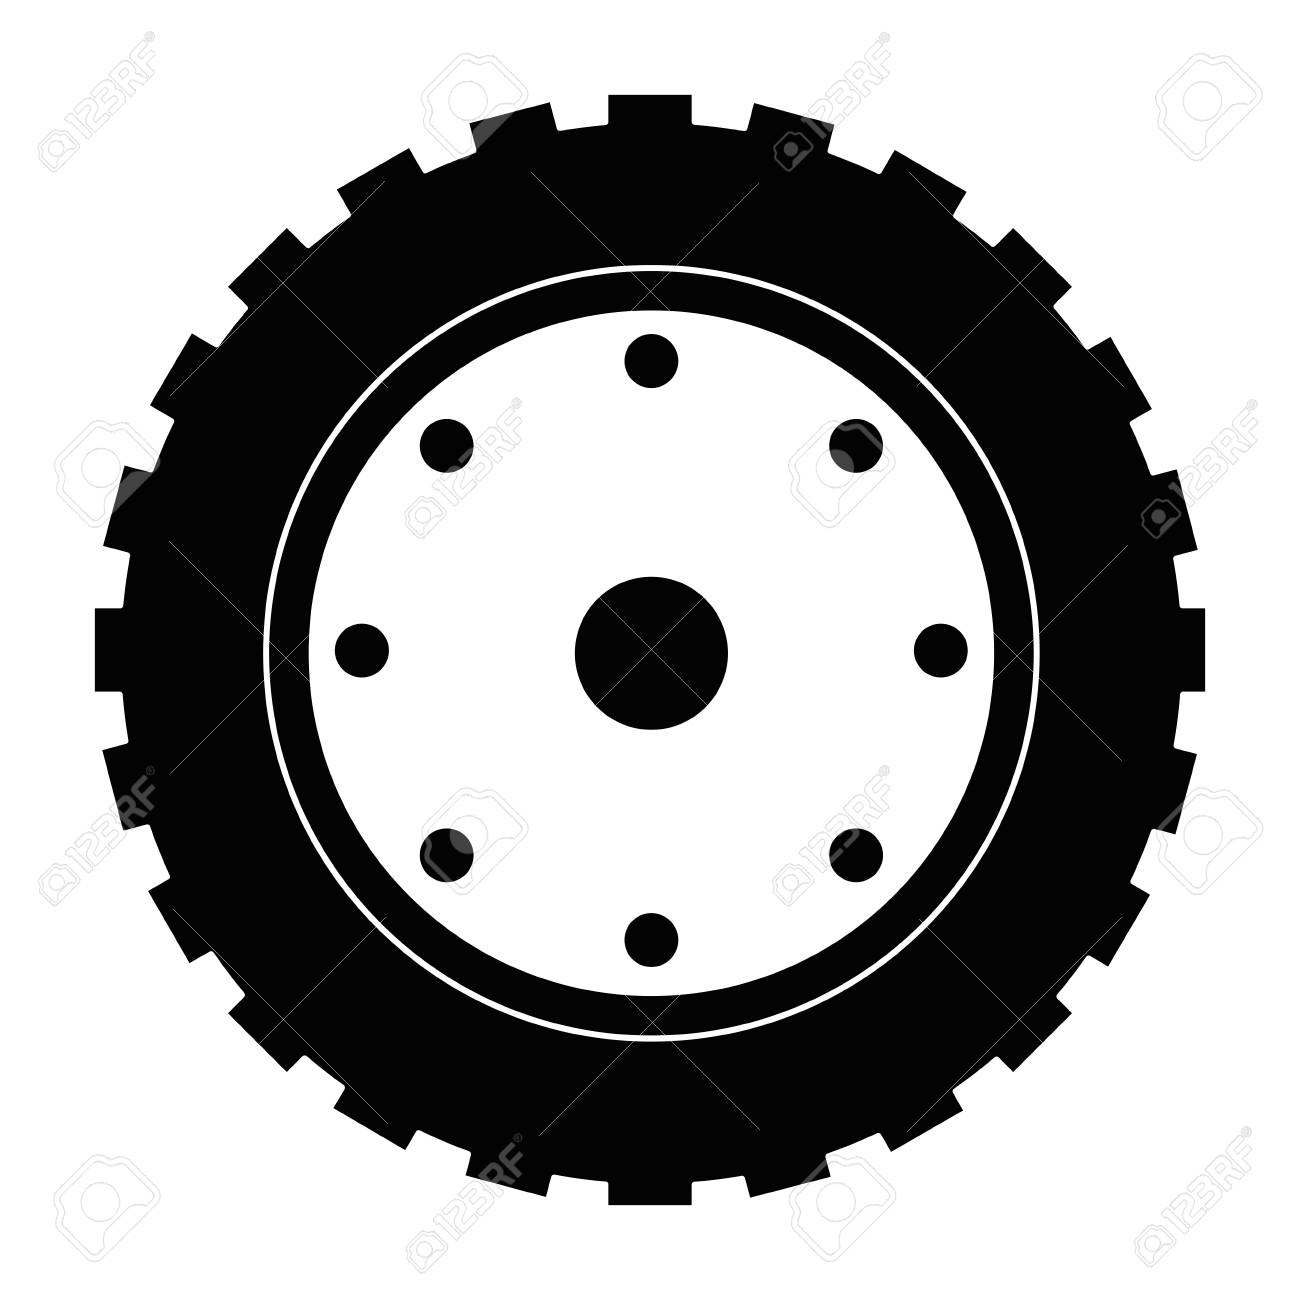 Tractor tire isolated icon